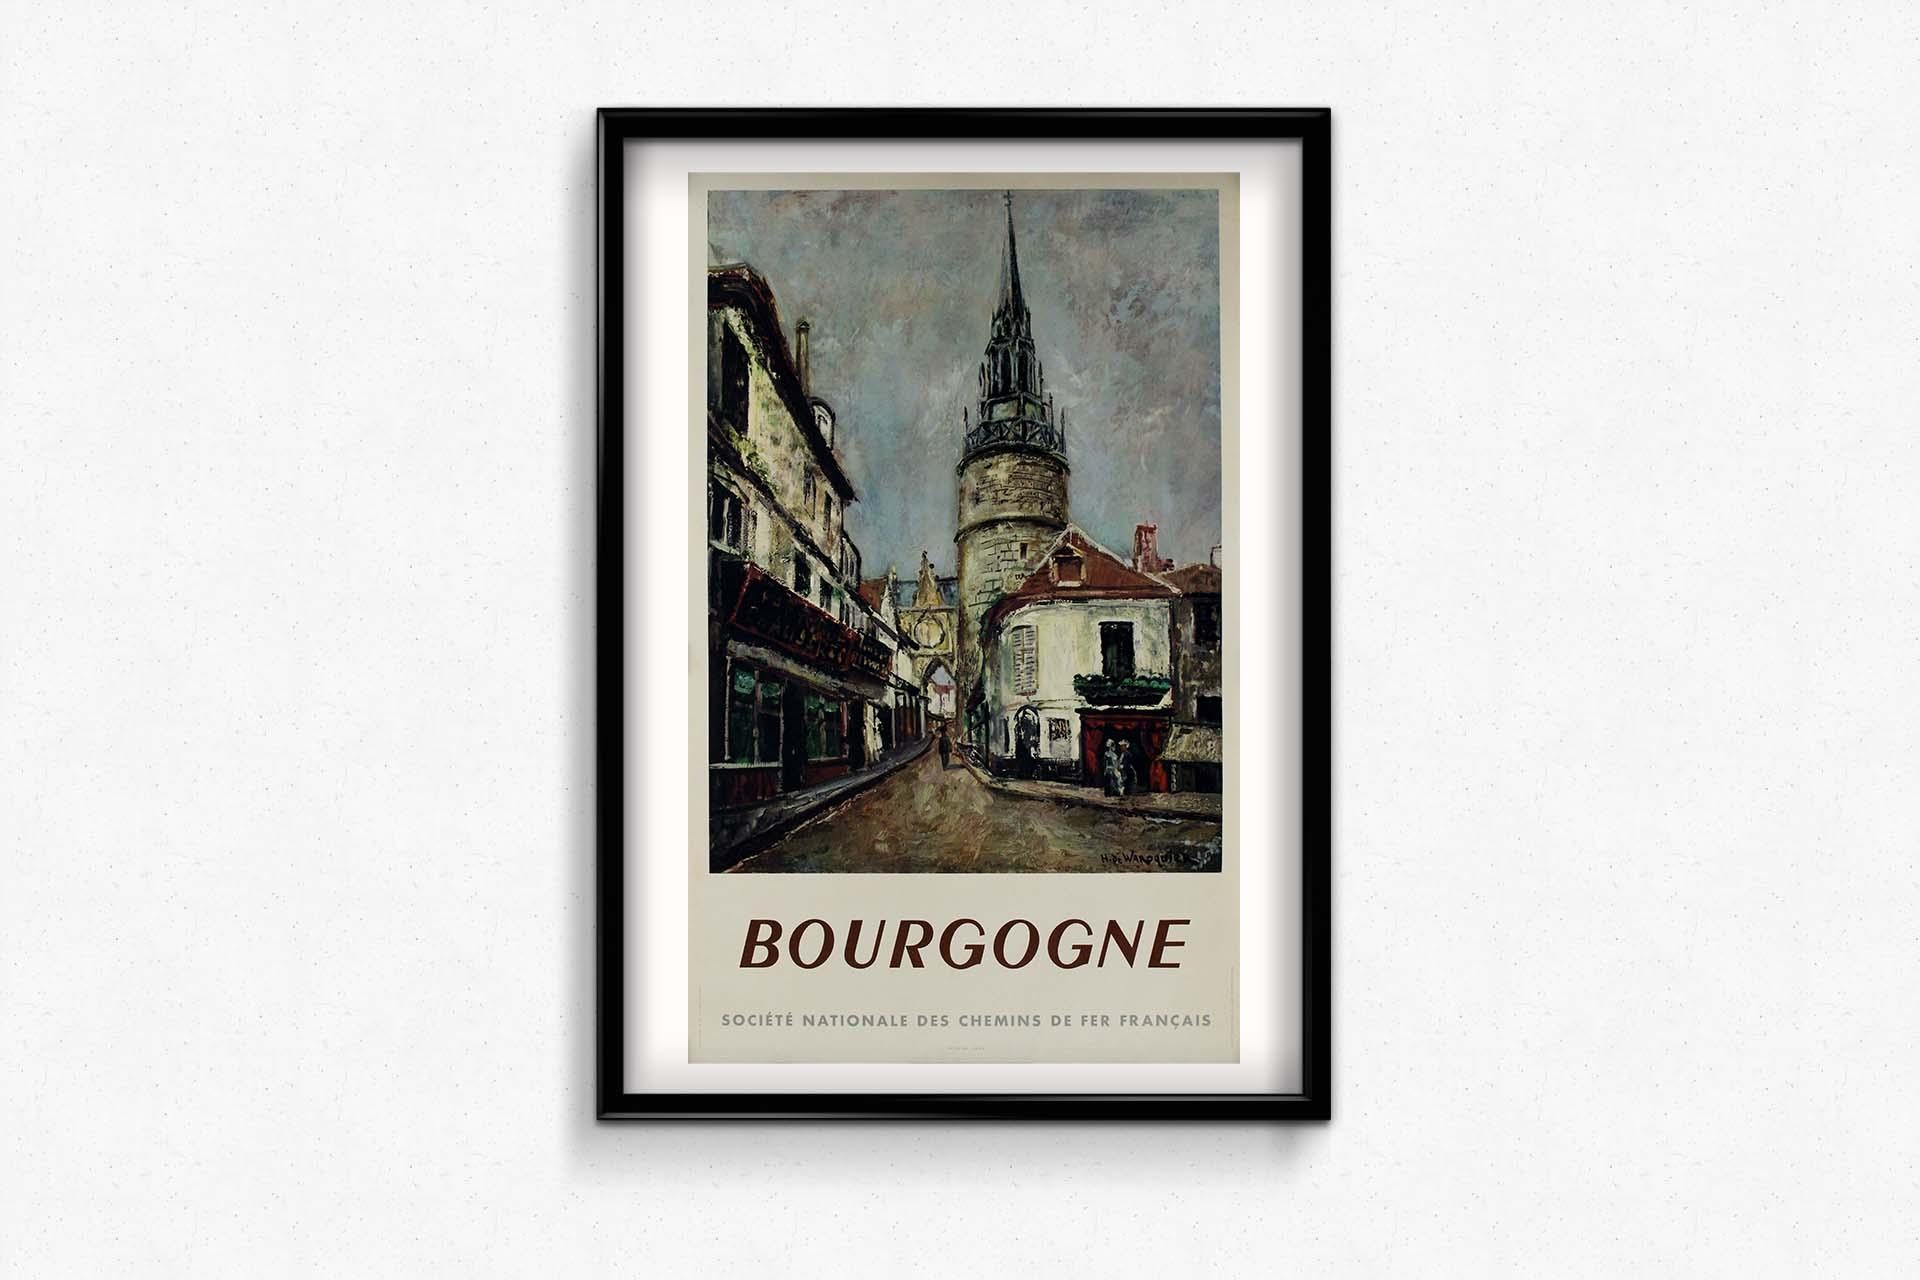 The original 1949 travel poster by Henry De Waroquier for Bourgogne, sponsored by SNCF (French National Railway Company), invites viewers to embark on a captivating journey through the picturesque landscapes of Burgundy, France.
Waroquier's artistic